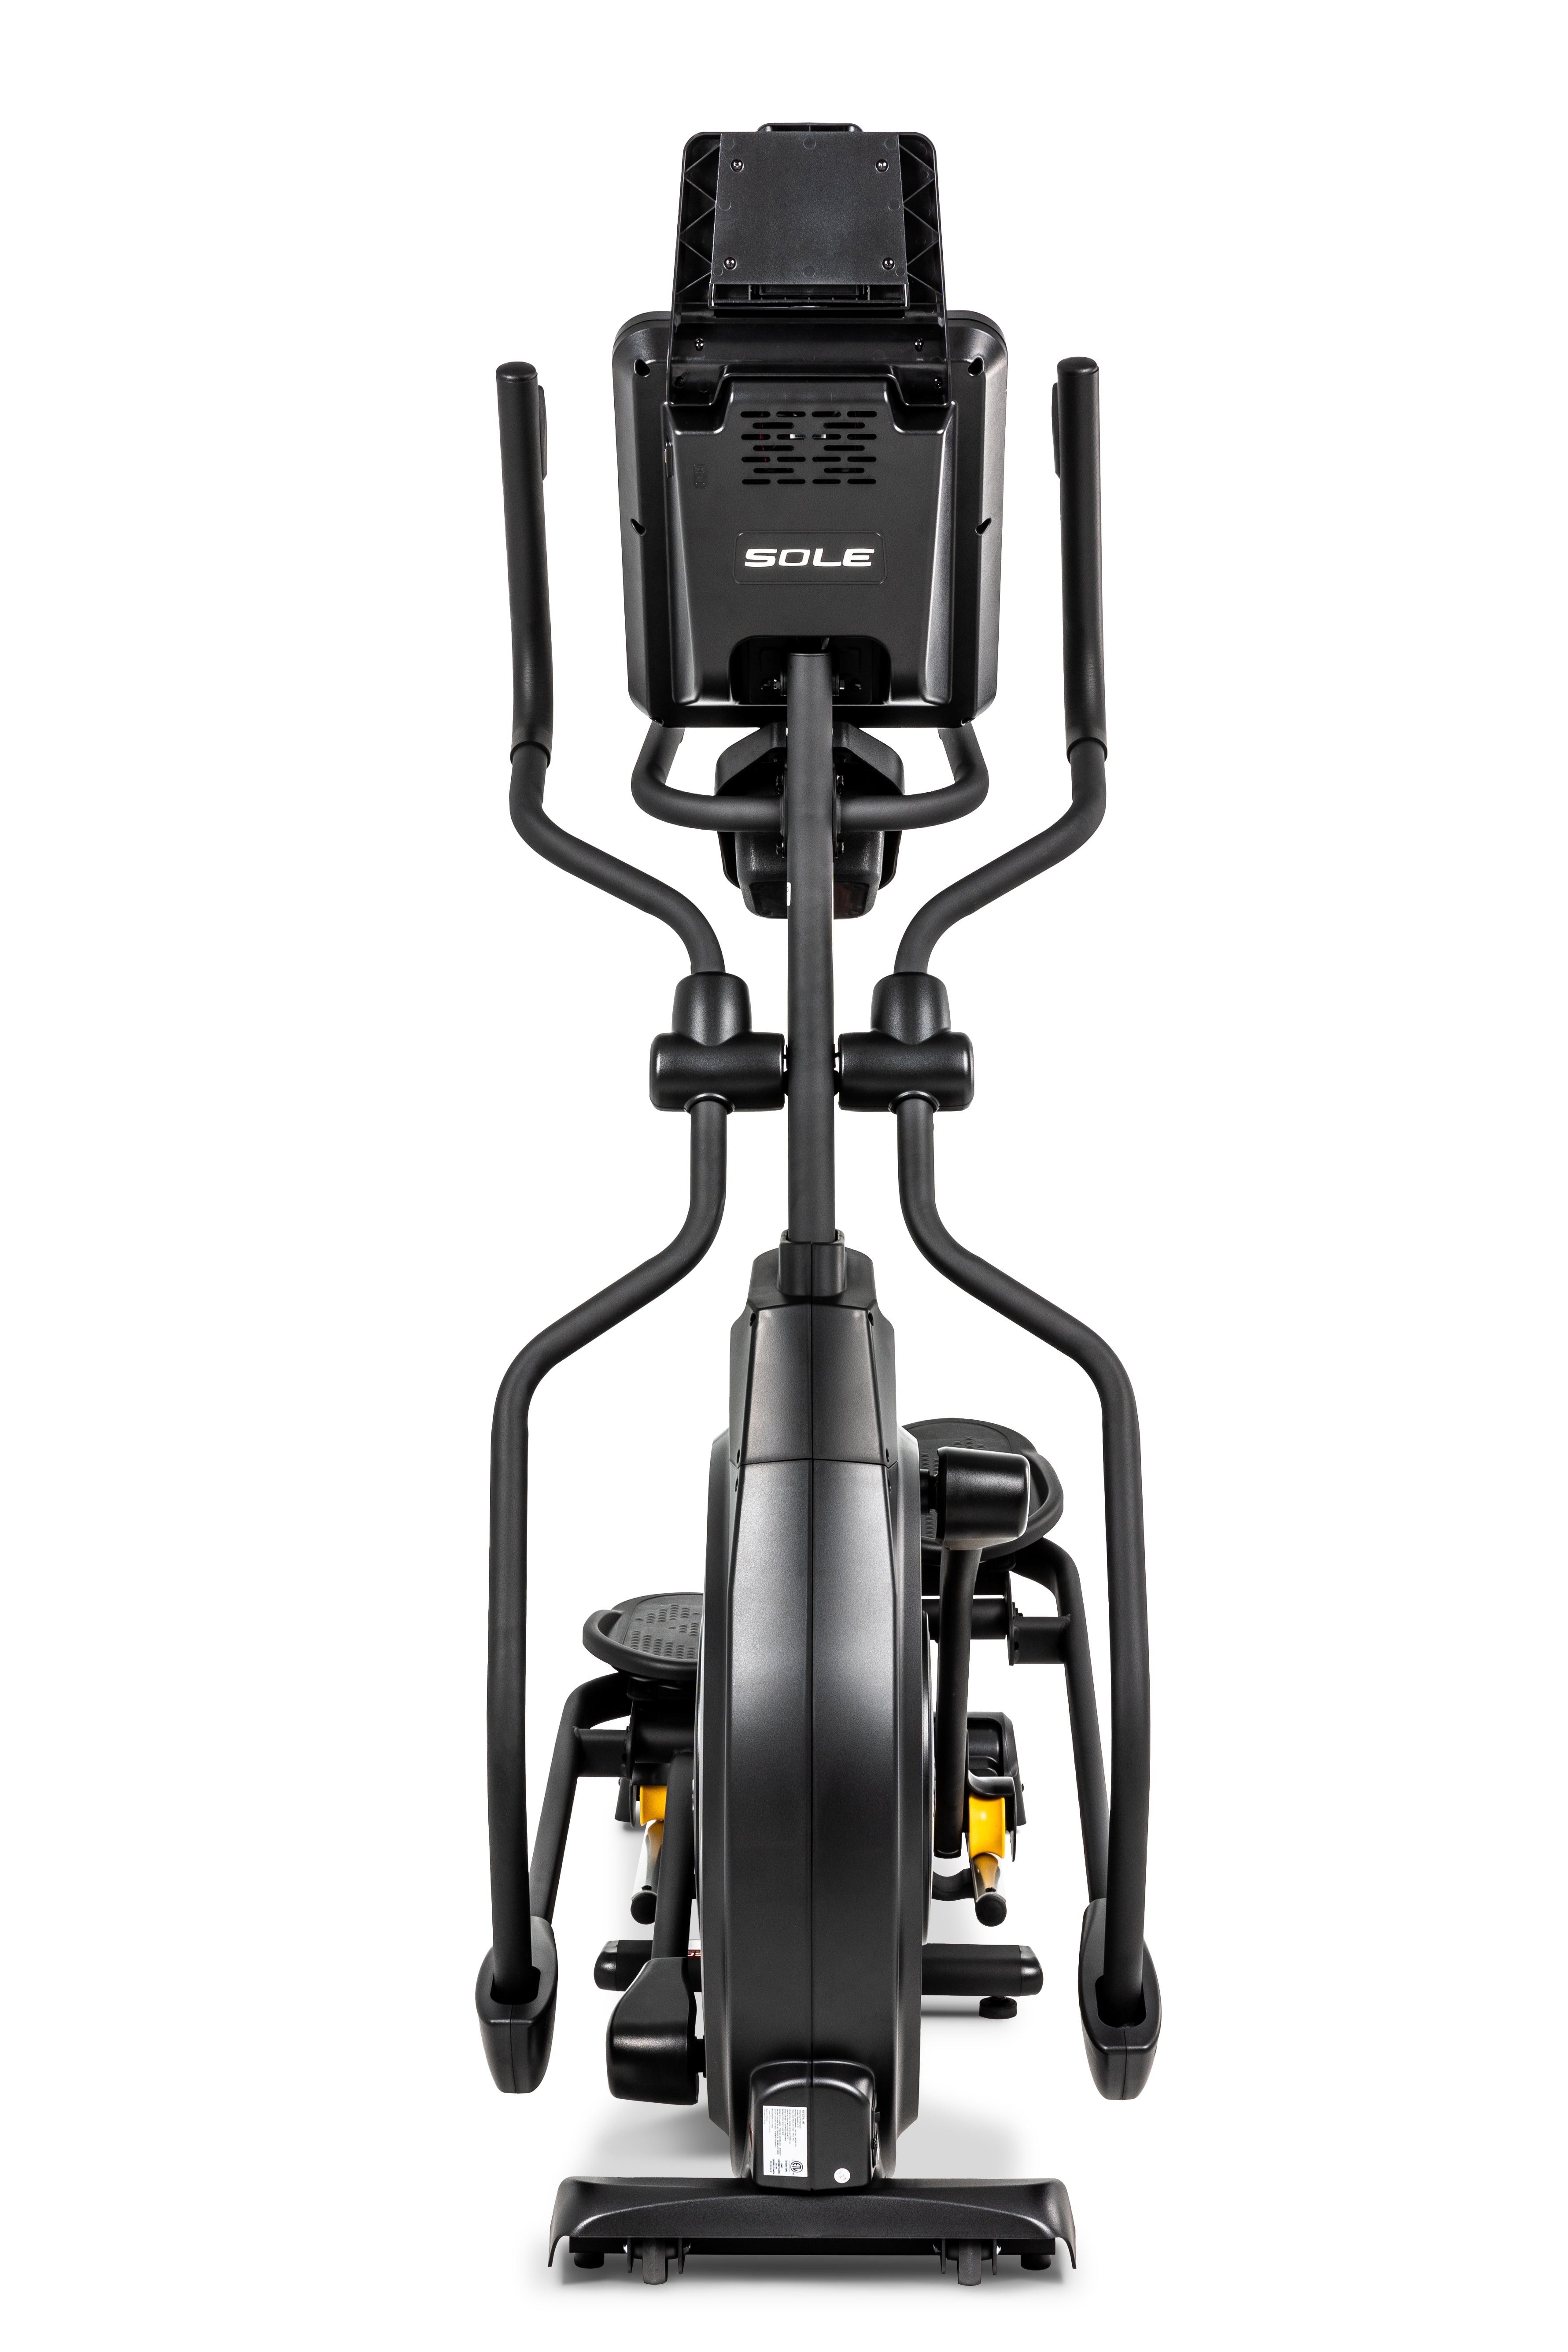 Front view of the Sole E25 elliptical machine, showcasing its sleek black design, digital control panel at the top, dual handlebars, and sturdy base with foot pedals, set against a white background.